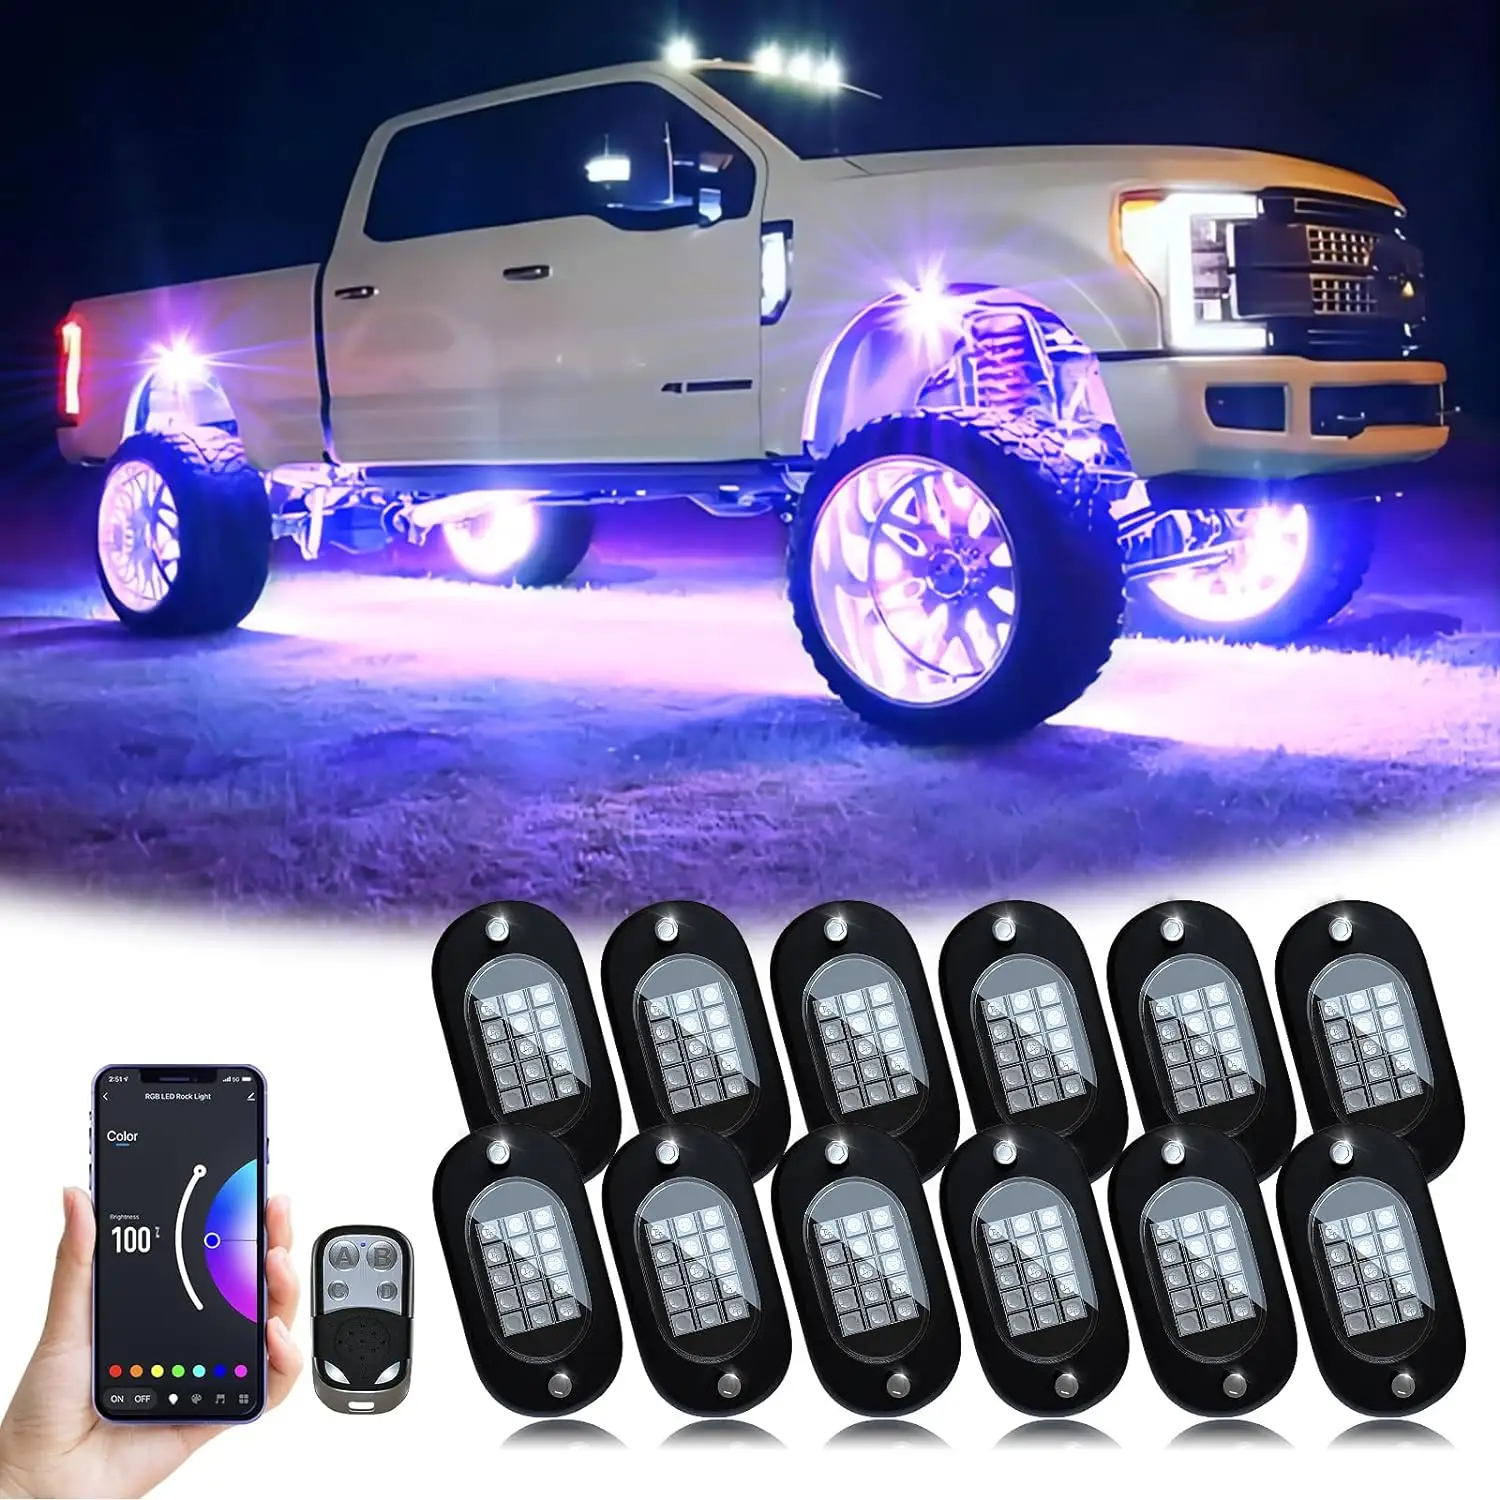 YiLaie Quality Ambient Car Light Waterproof IP68 Car Underglow Kit for ATV UTV SUV Off Road Boat Truck LED Car RGBW Rock Lights